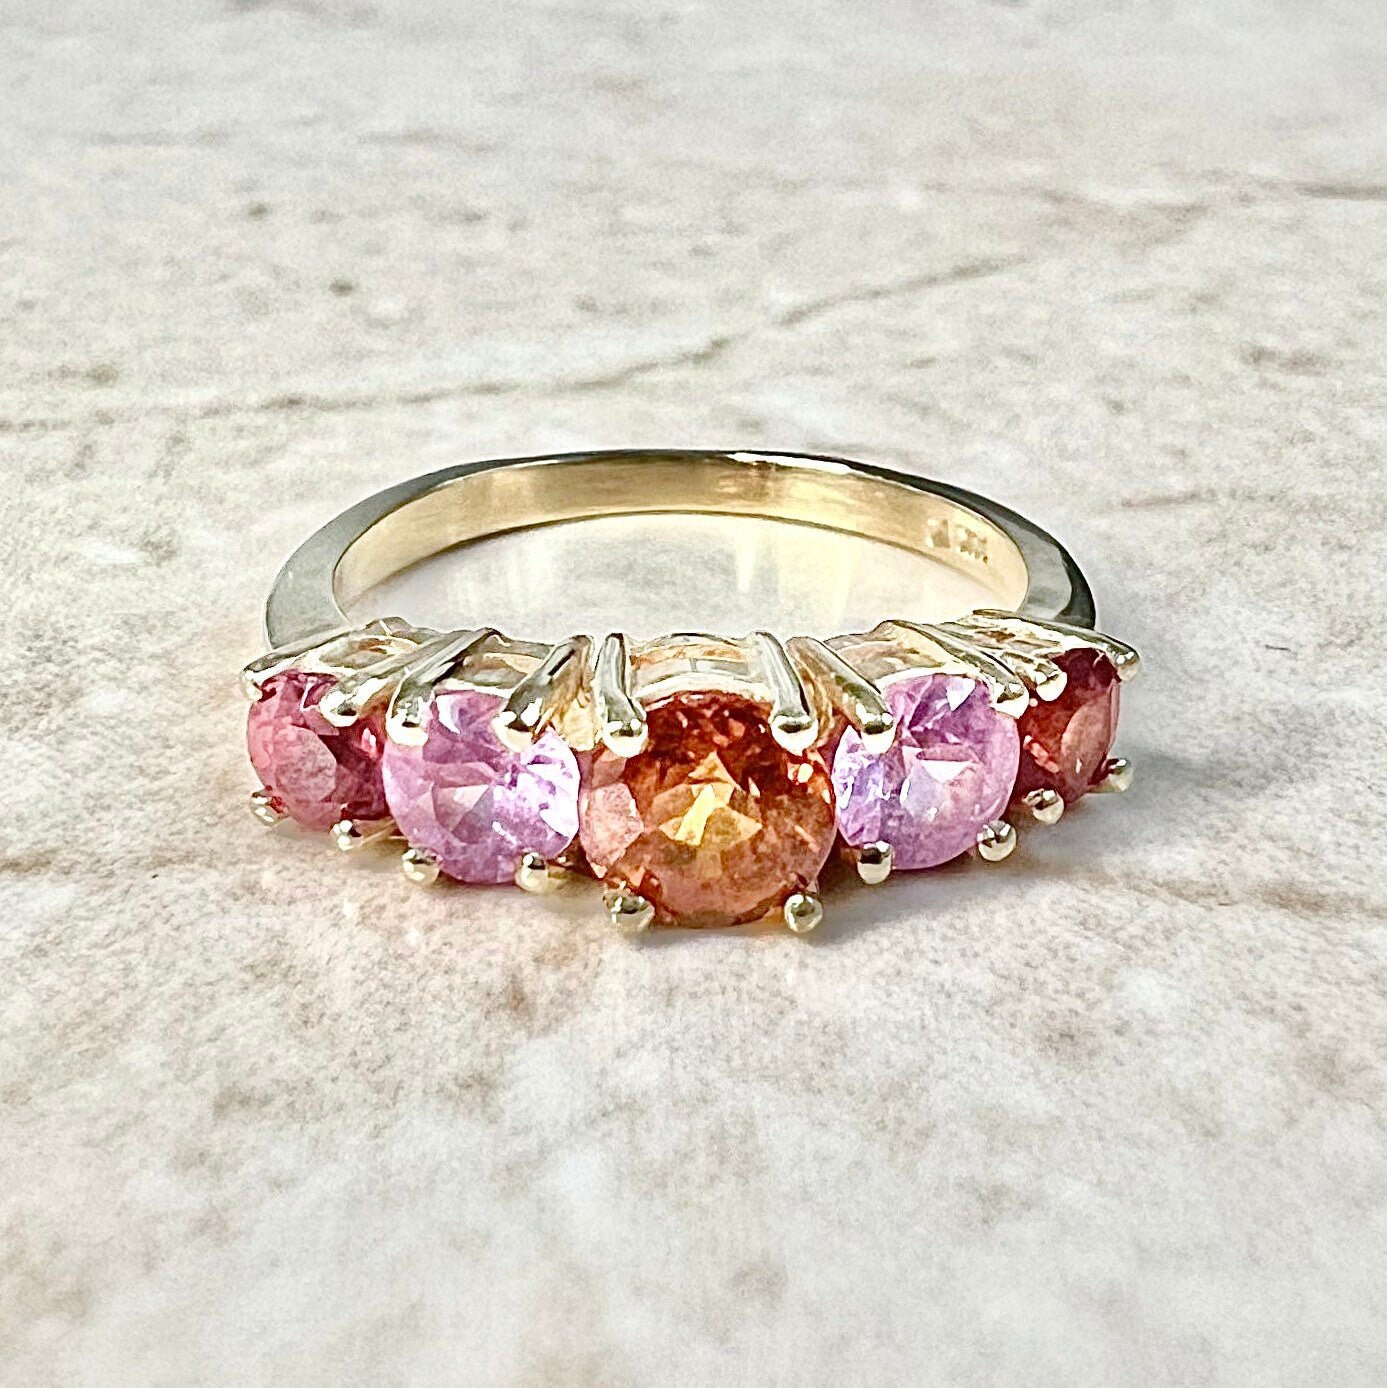 Vintage 14K Imperial Topaz Band Ring - Yellow Gold Multi Color Topaz Ring - Topaz Cocktail Ring - Best Gifts For Her - Gold Topaz Band